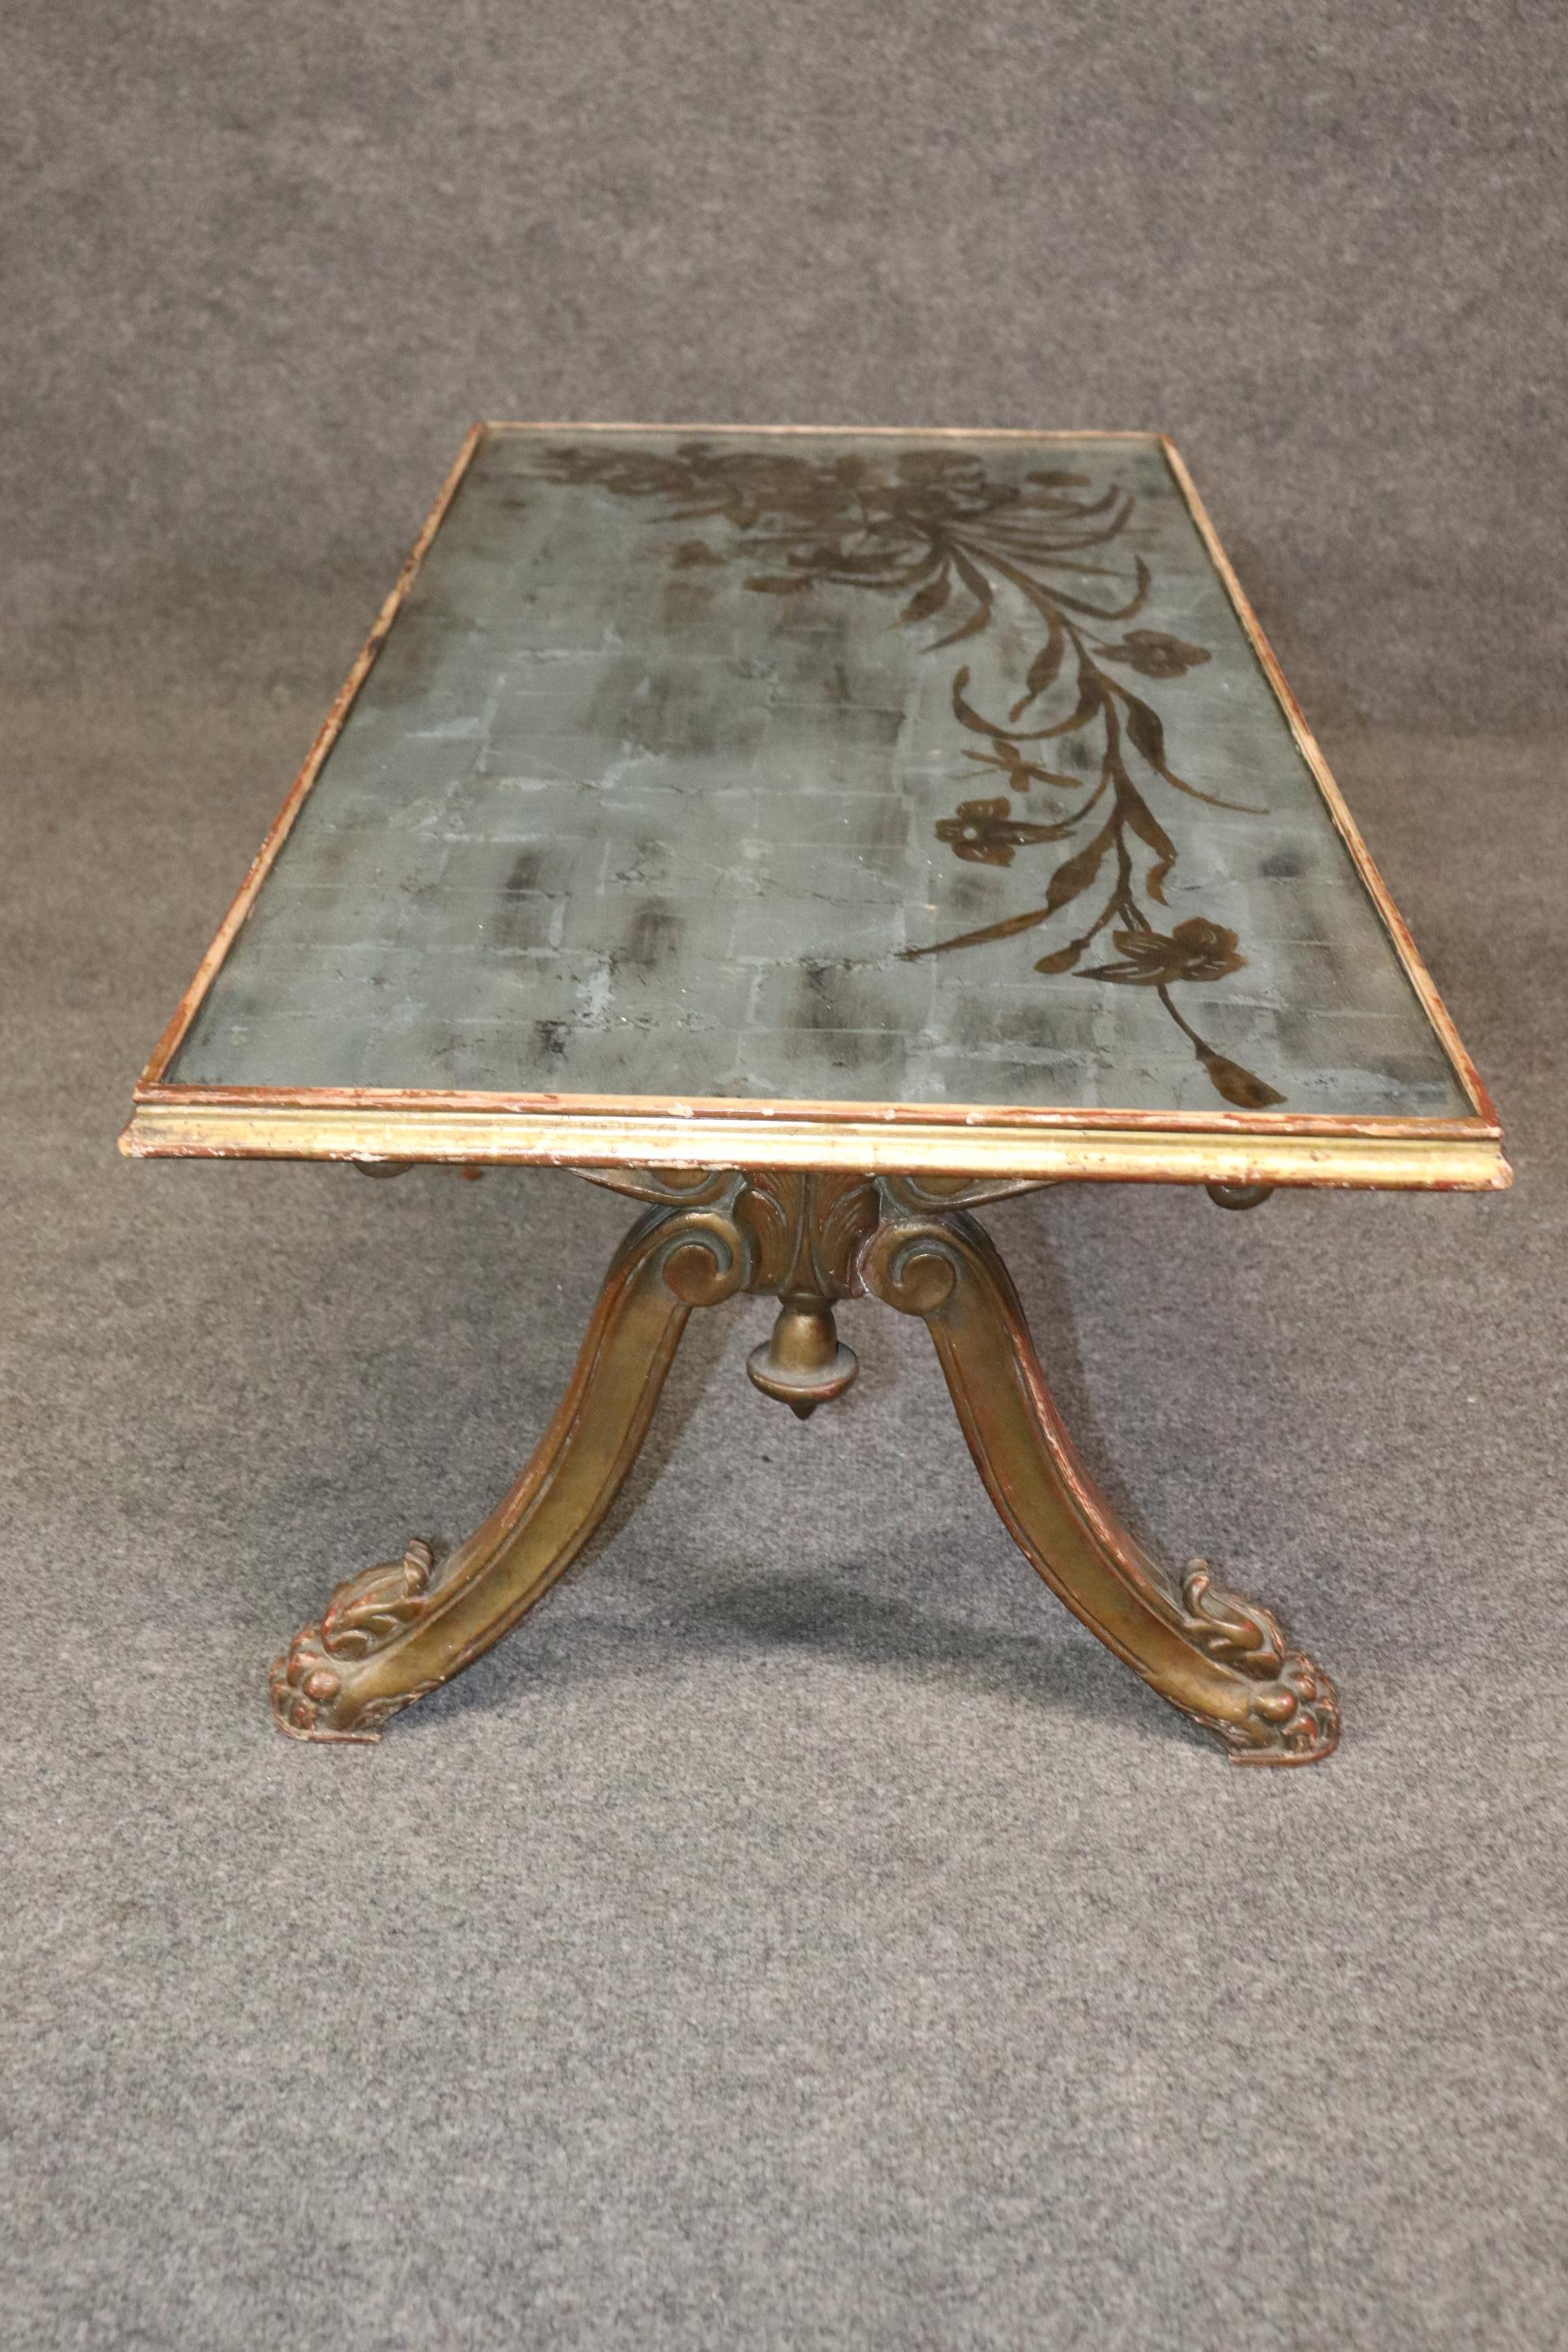 Antique French Directoire Style Eglomise Gilt Coffee Table Attributed to Jansen In Good Condition For Sale In Swedesboro, NJ